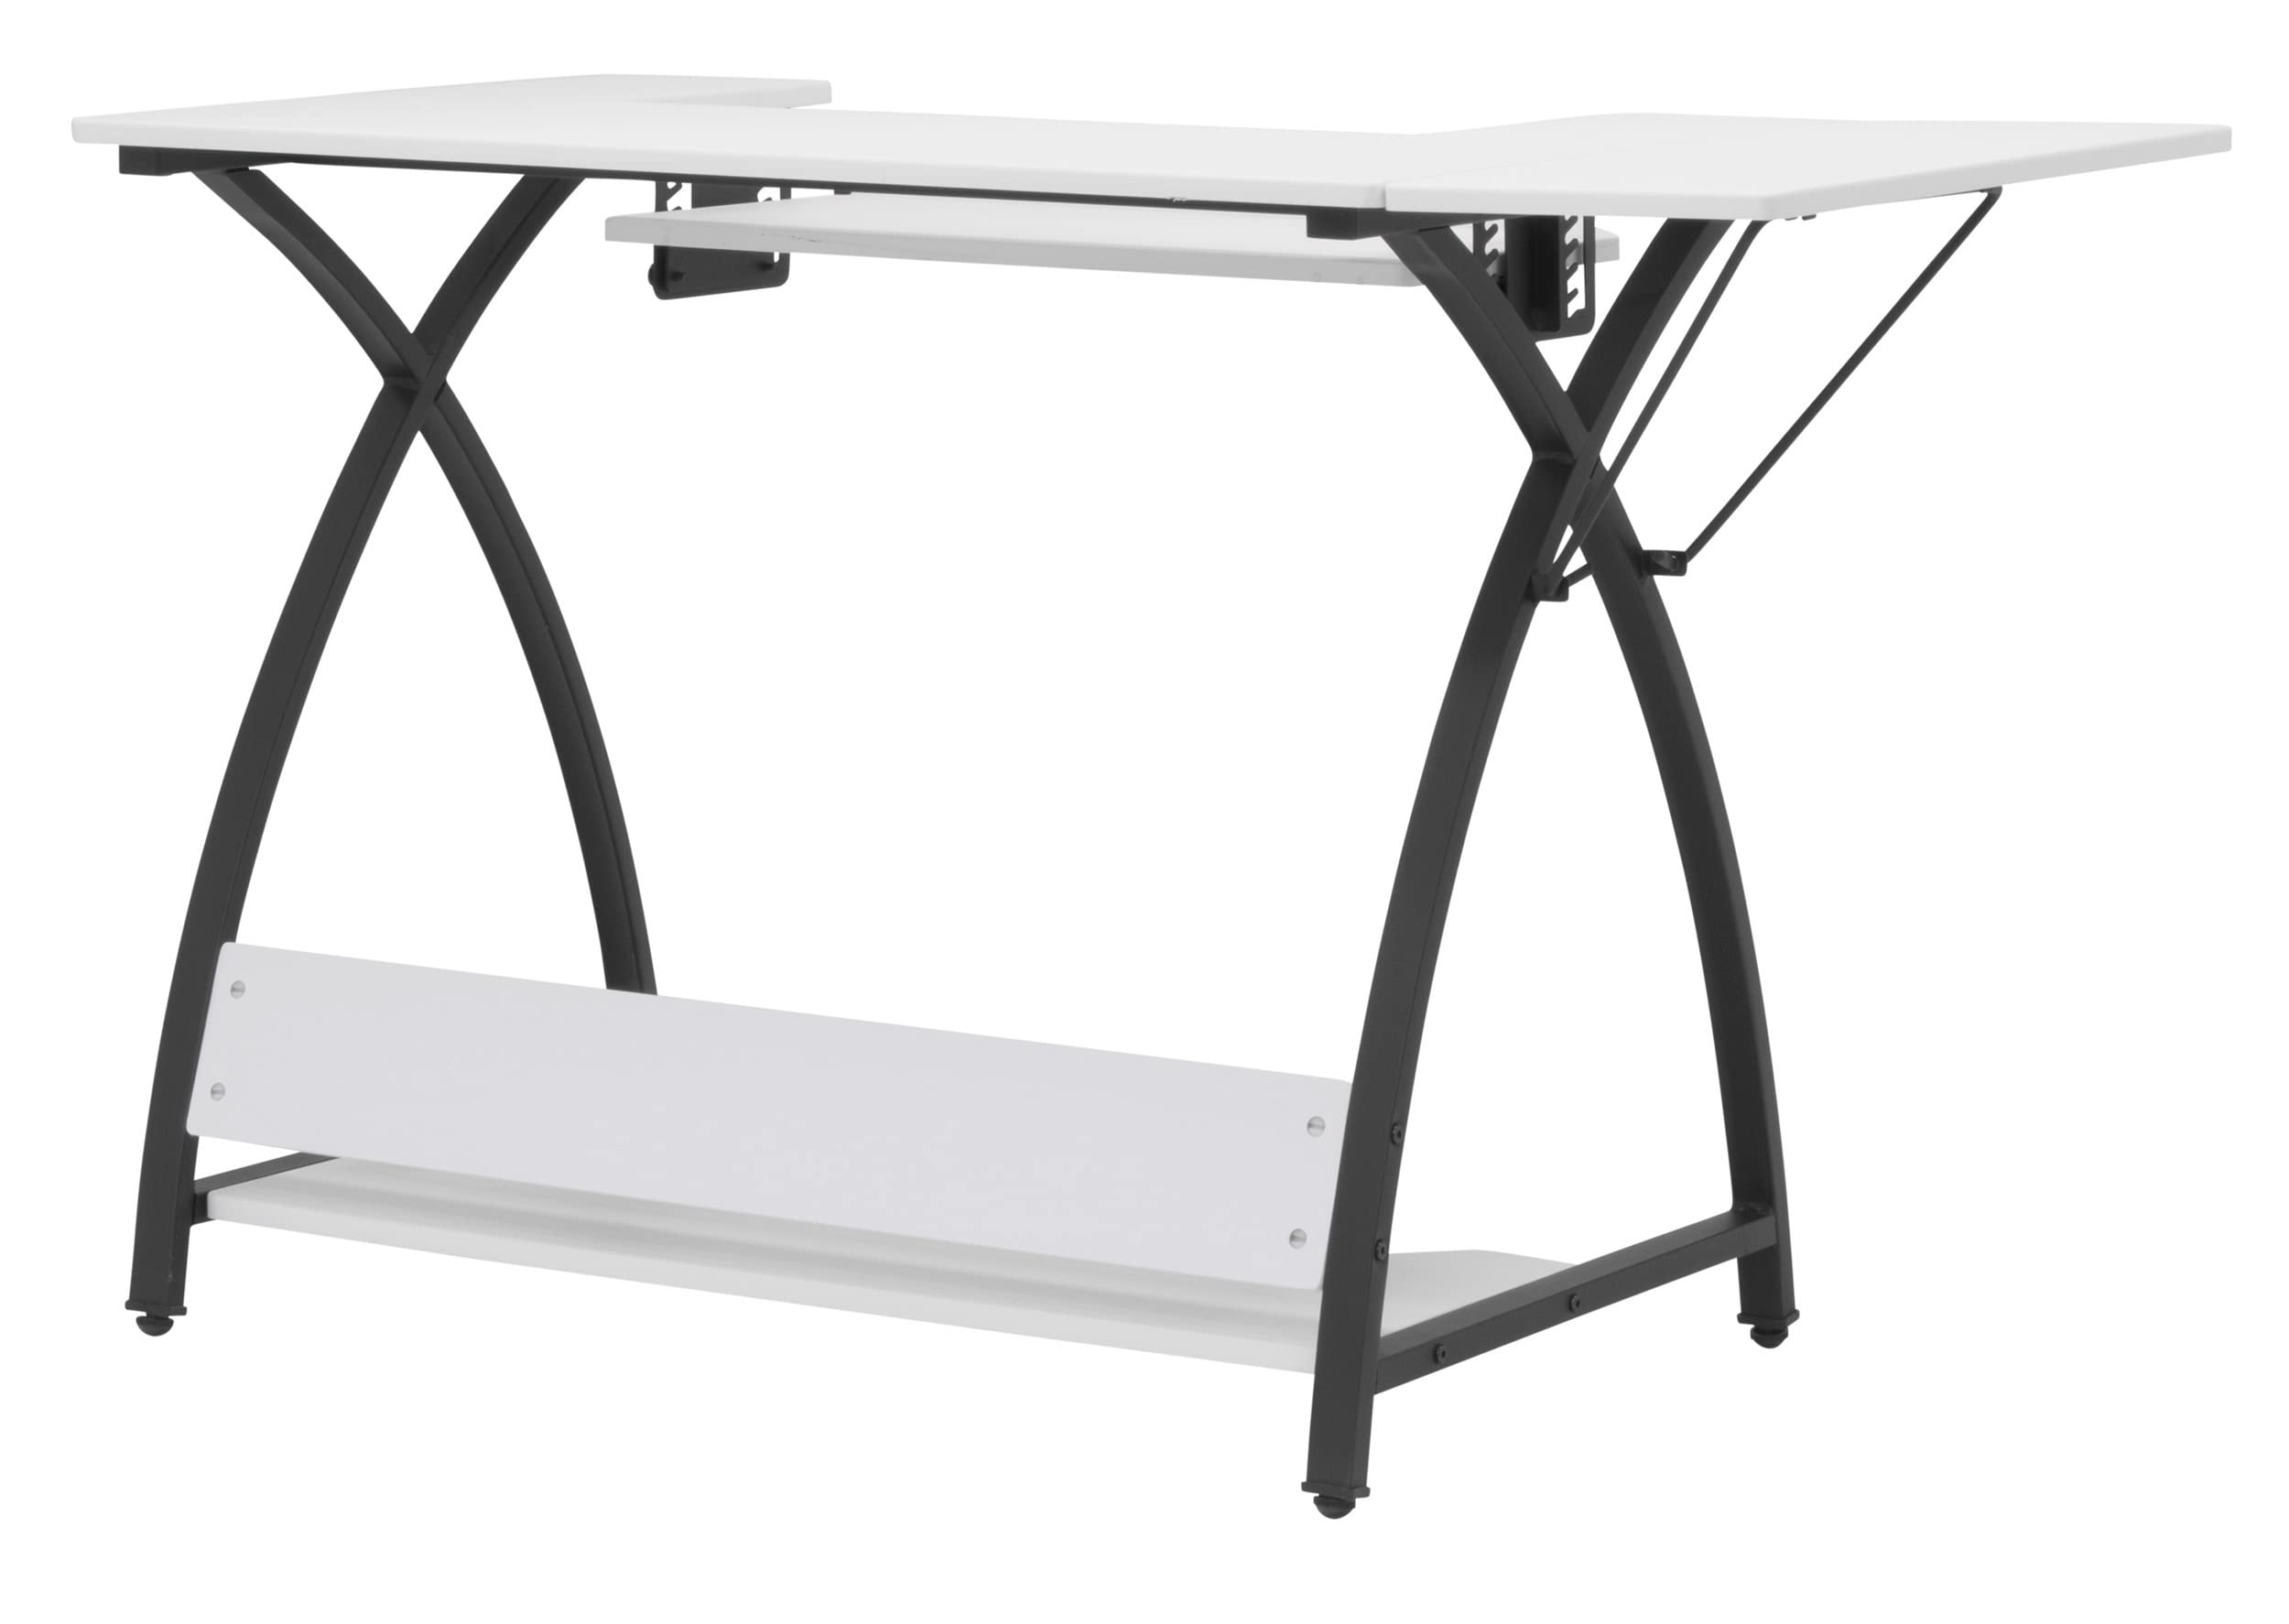 Sew Ready Comet Plus Hobby Side and Lower Shelf Sewing Table, 45.5